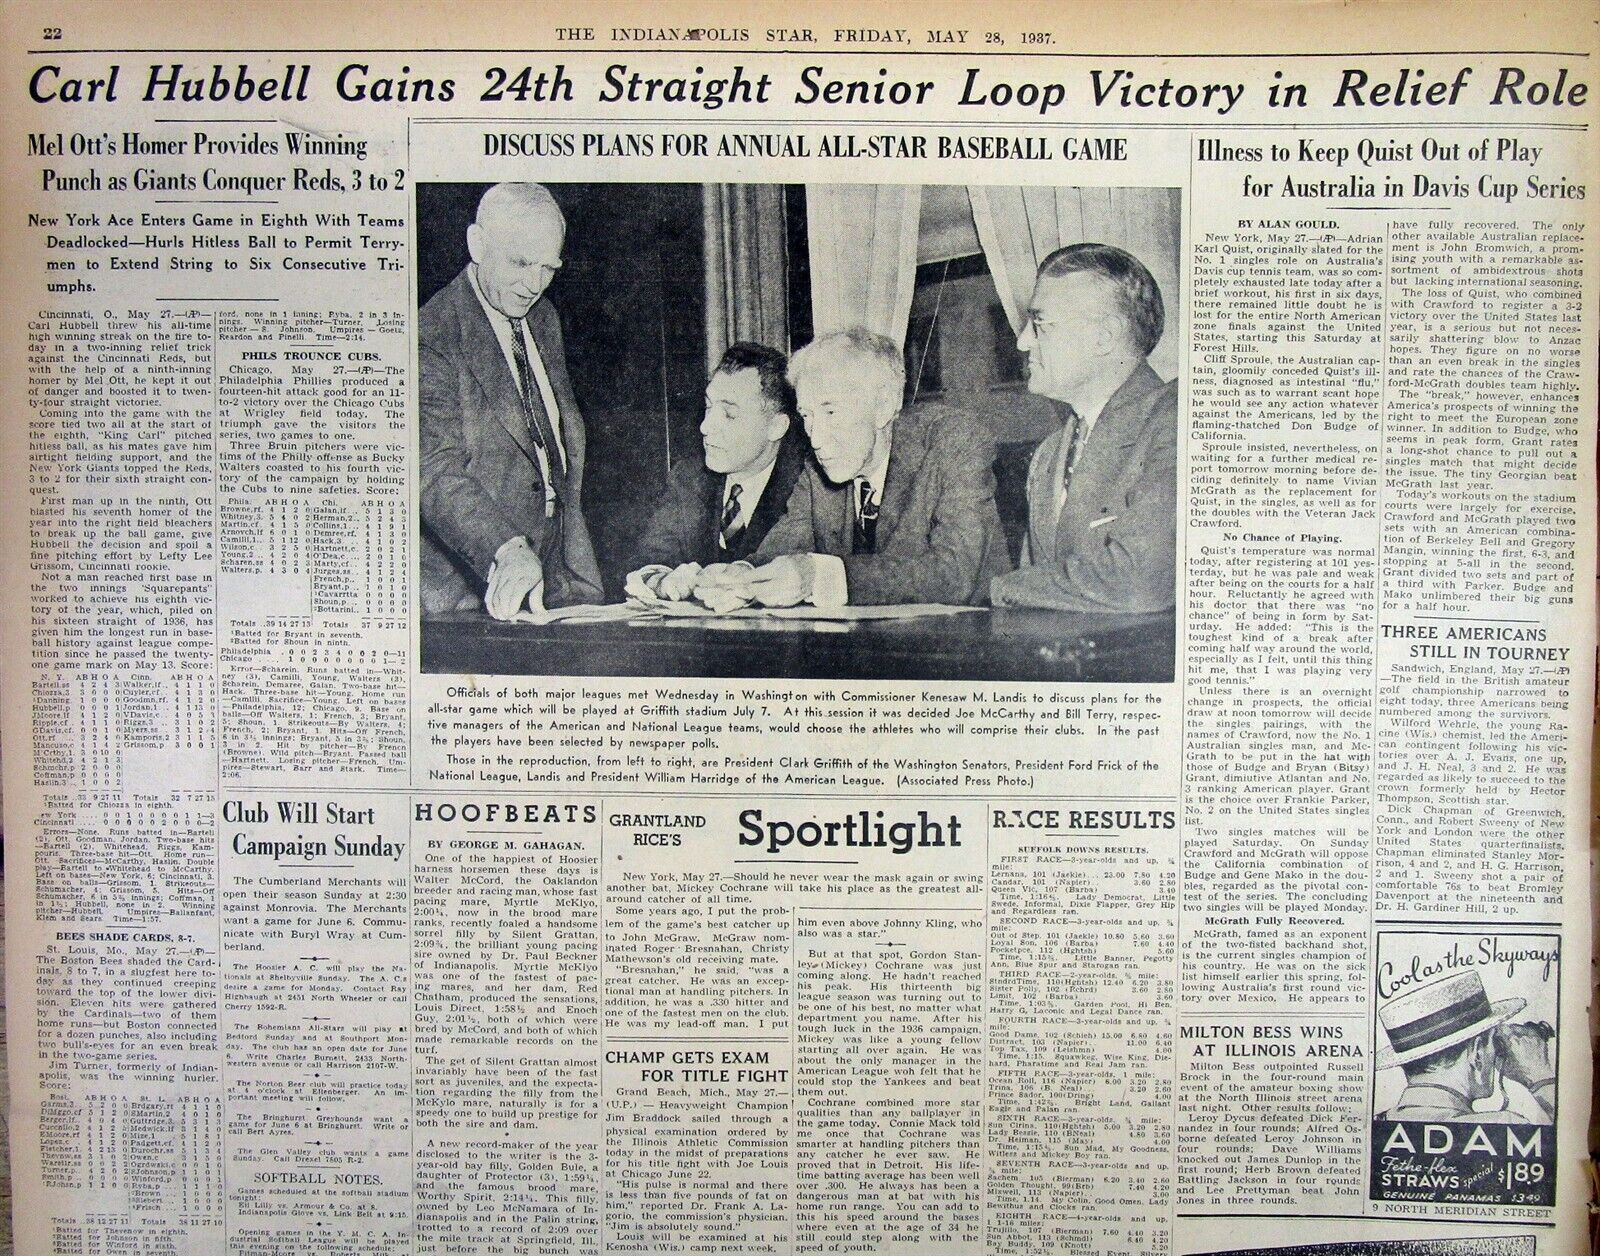 3 1937 newspapers CARL HUBBELL sets new PITCHING RECORD of 24 CONSECUTIVE WINS